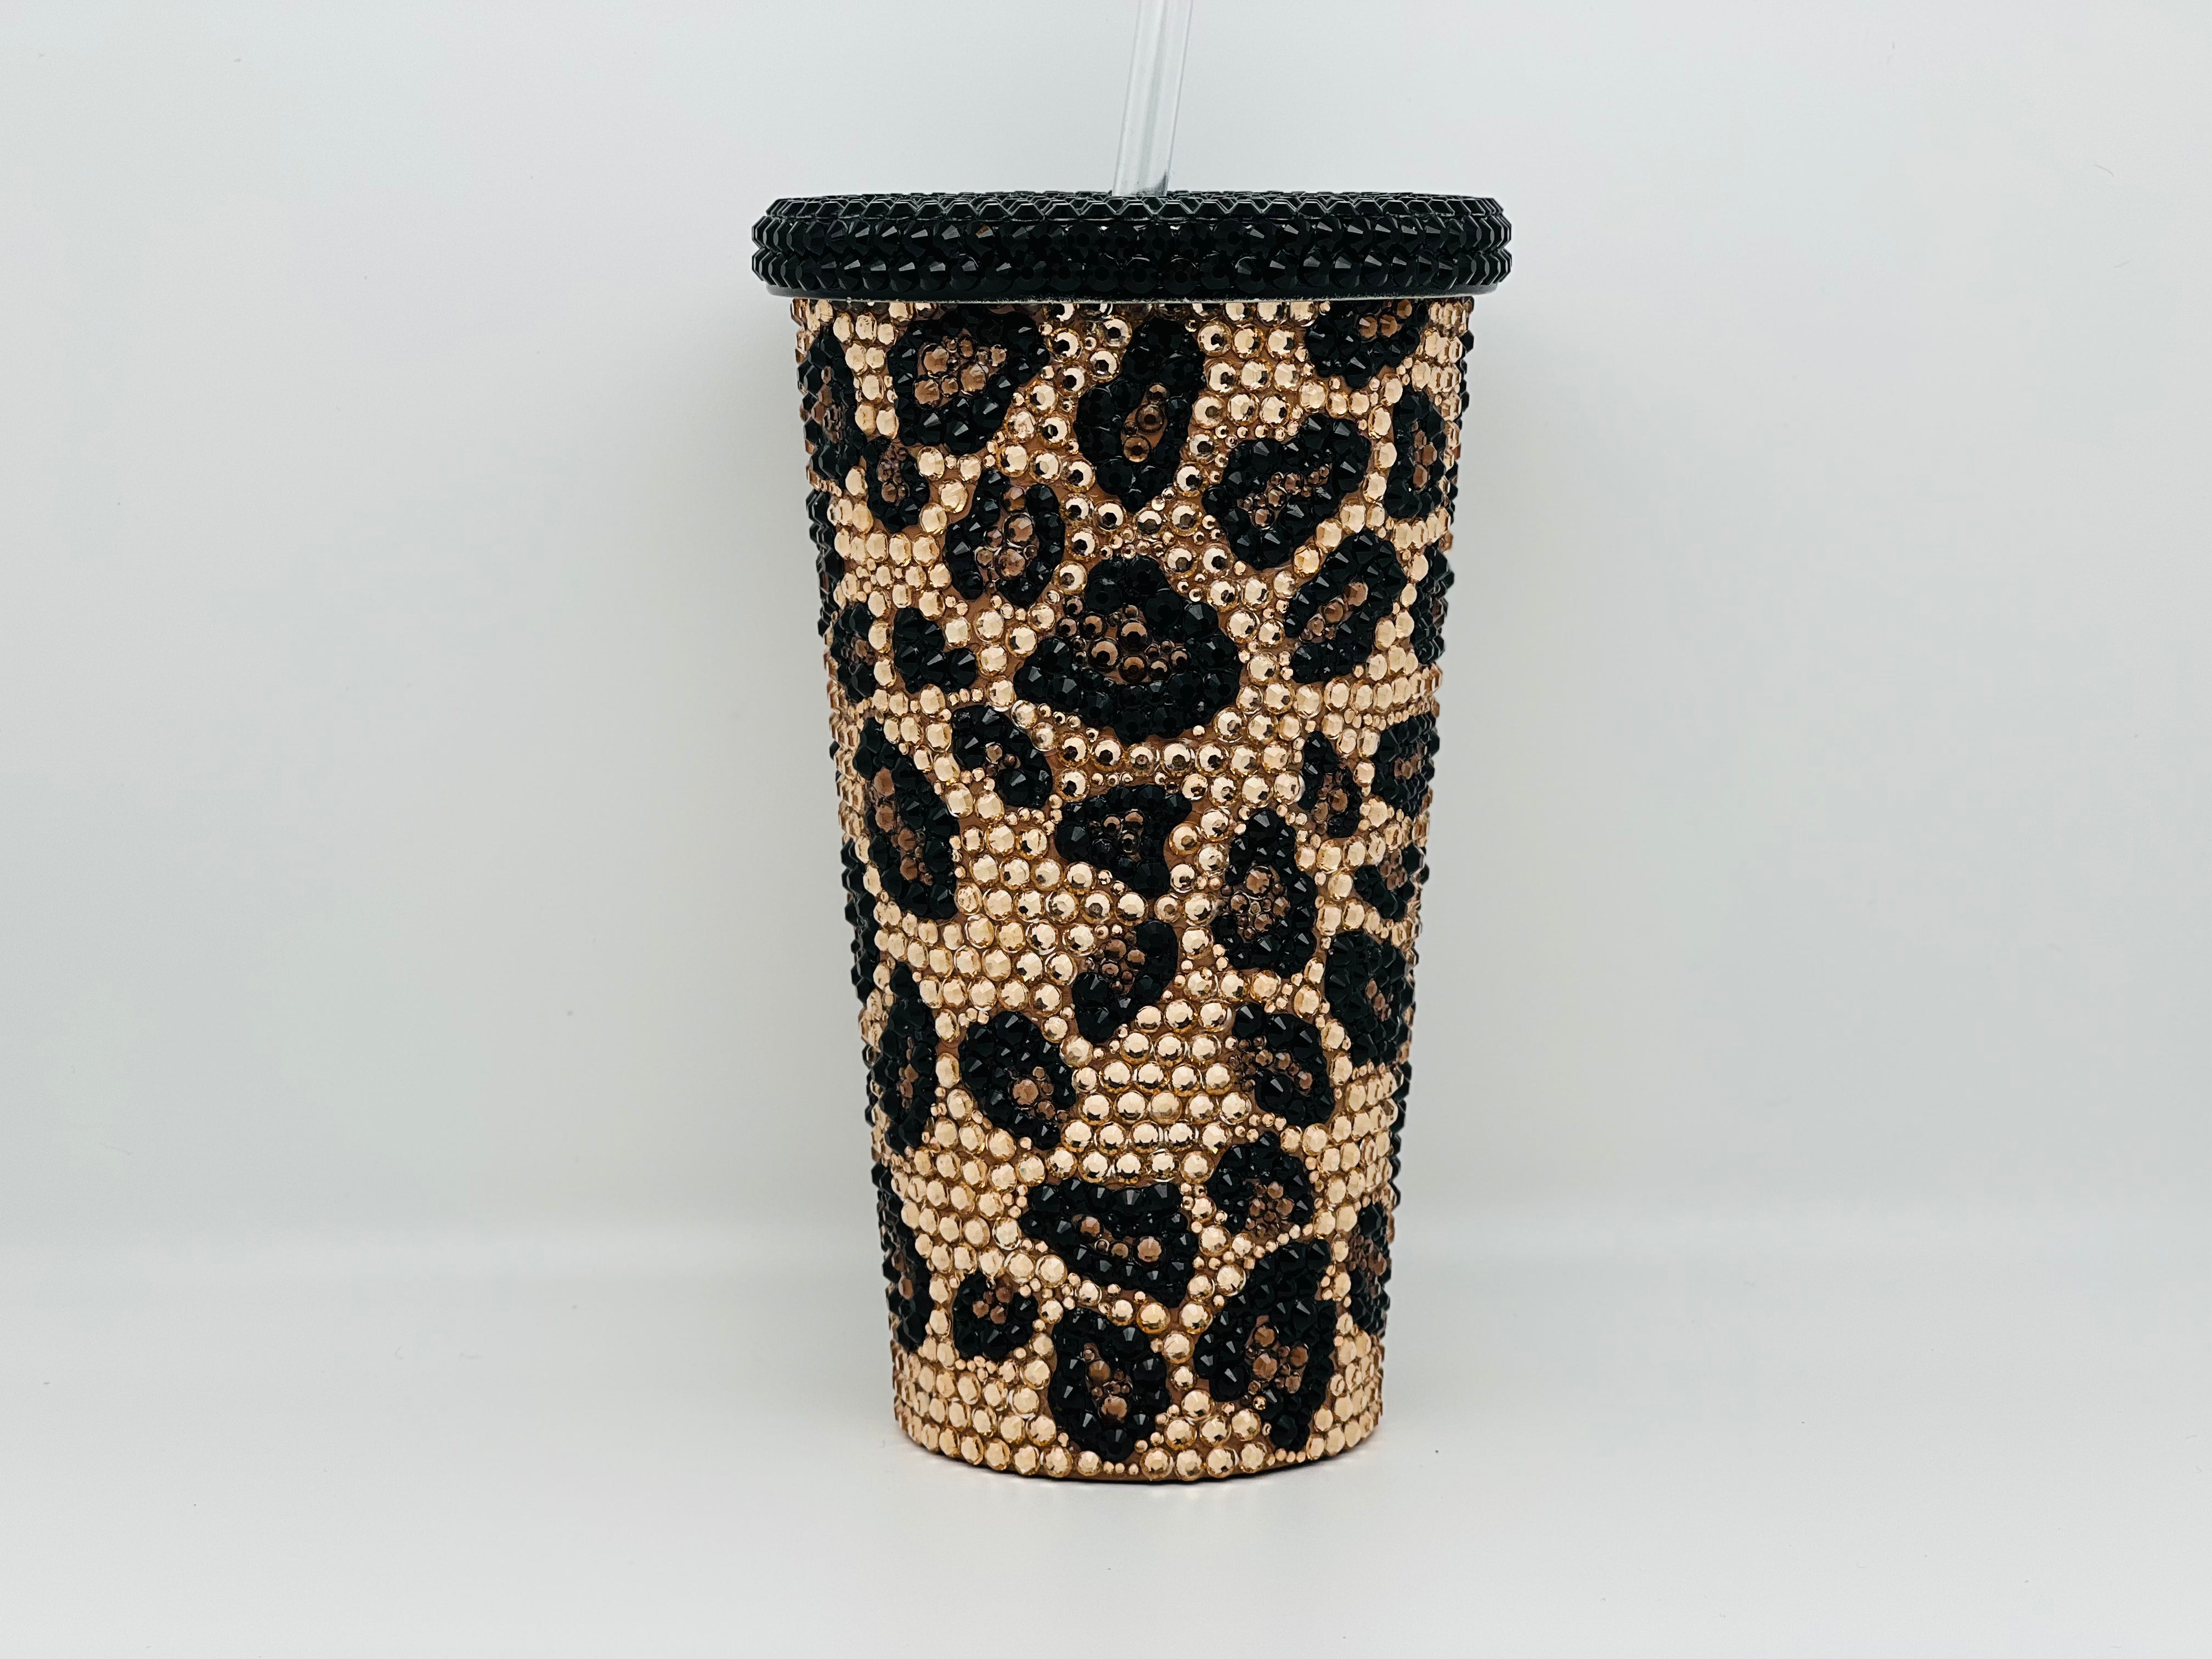 Black Glitter Cheetah Print Reusable Cold and Iced Coffee Cup Gift for Best  Friend Leopard Animal Print Custom Cheetah Tumbler Cup 